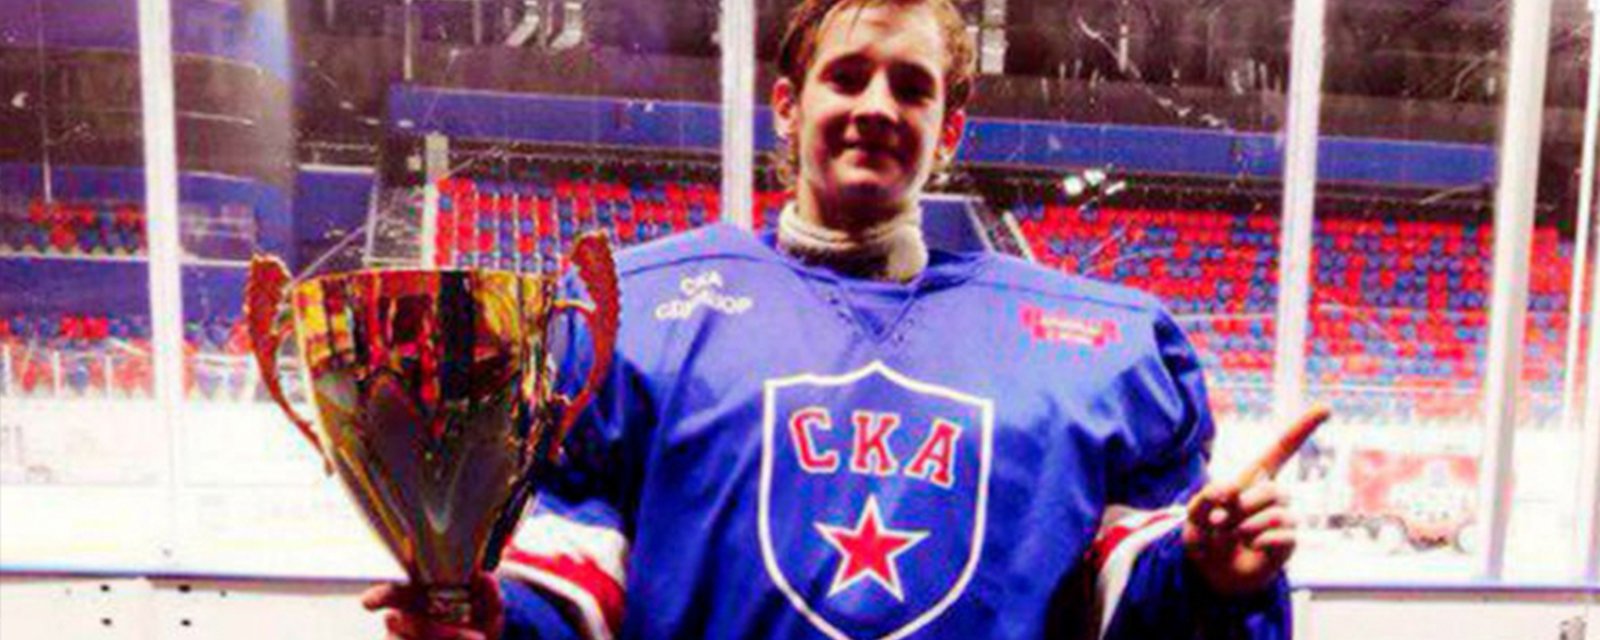 Wife of KHL star Sokolov brutally attacked and murdered by her own son